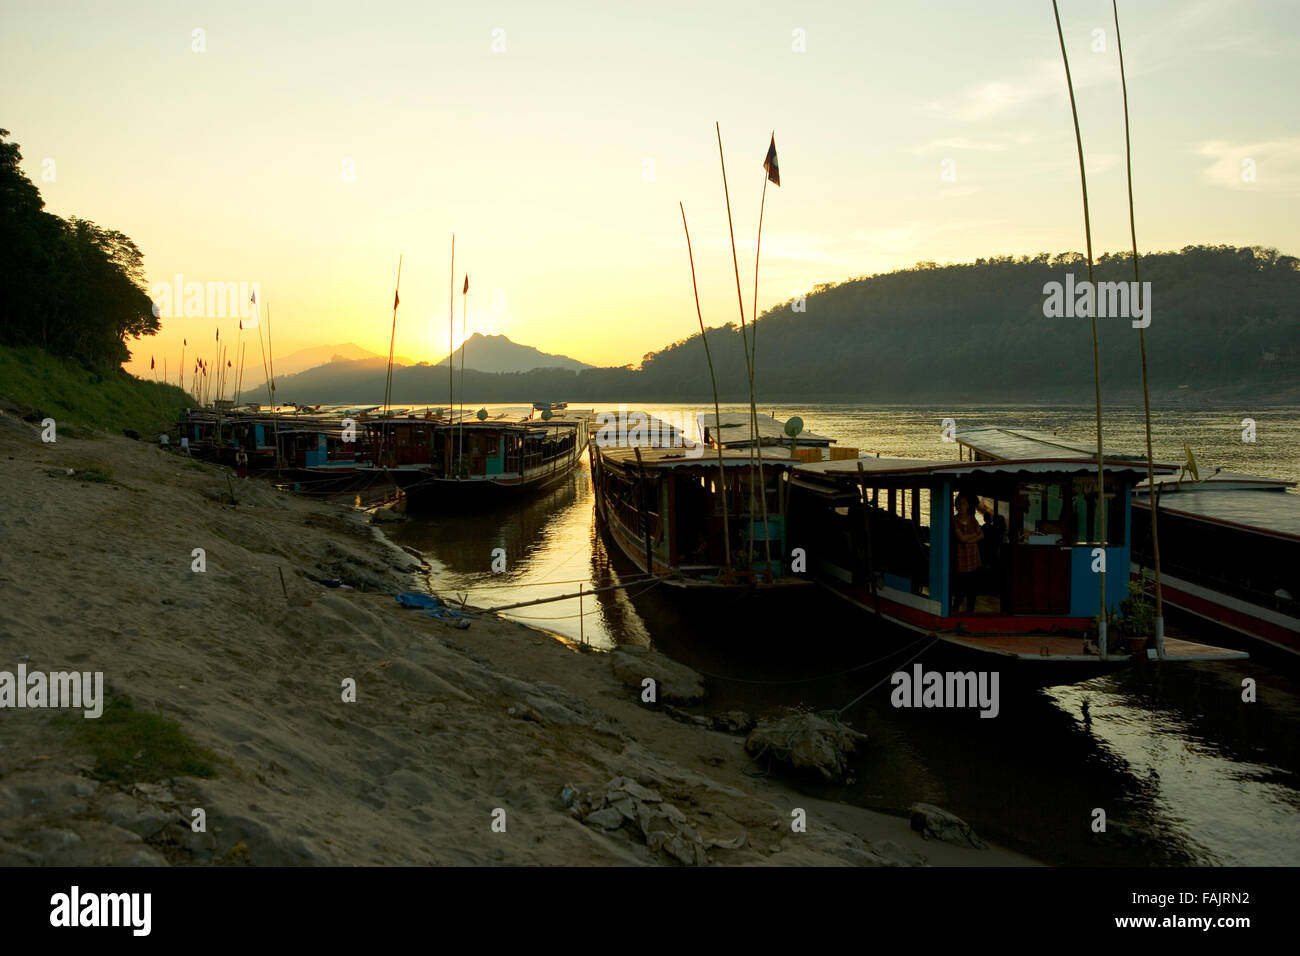 Boats on the Mekong River, Pak Beng, Laos. At sunset, dawn, morning, evening, South East Asia. Stock Photo